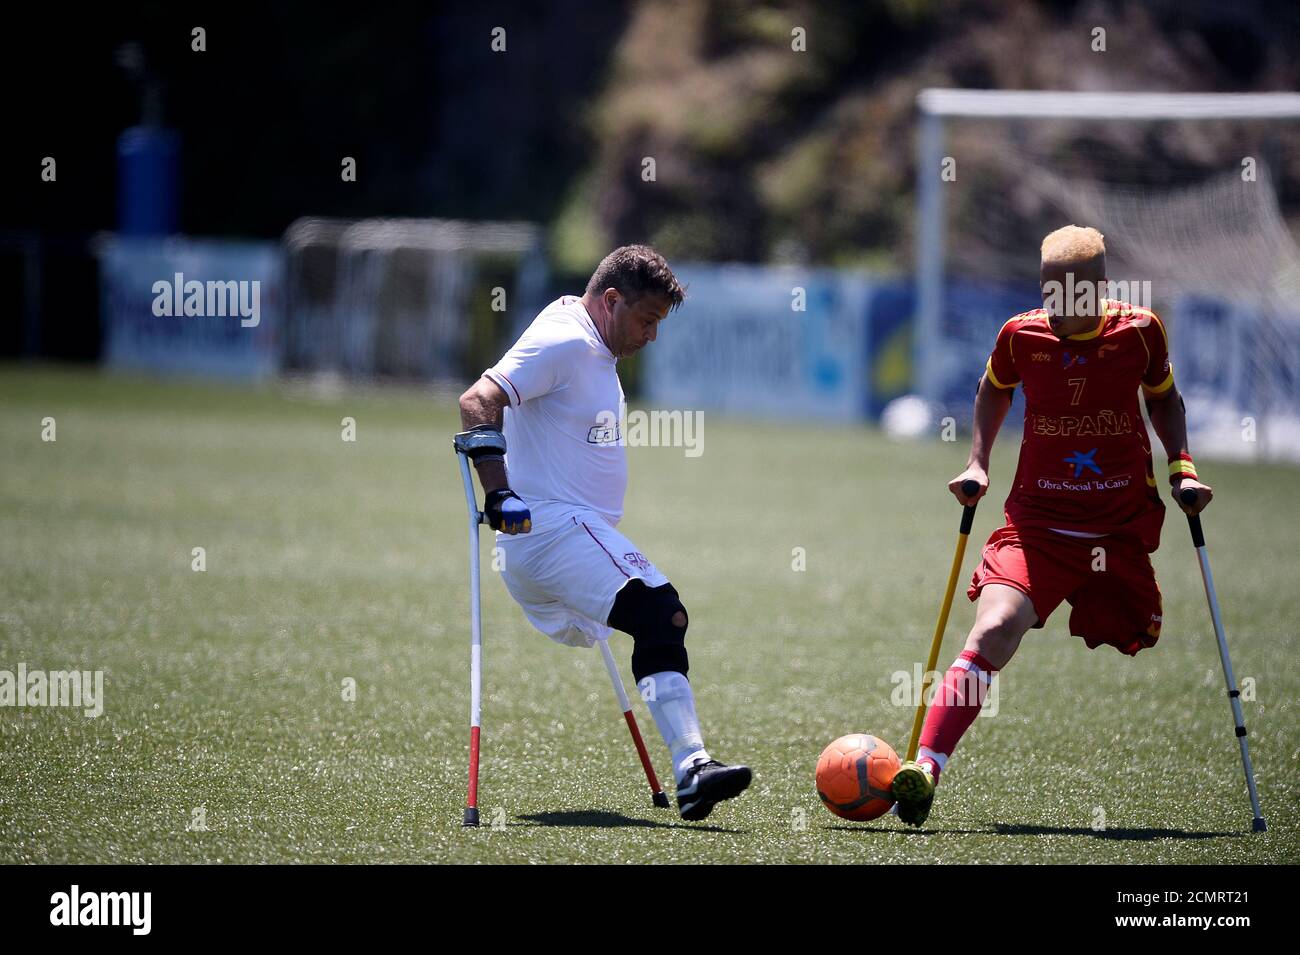 Spain's and Brazil's national team amputee football players play a  tournament match to promote the sport